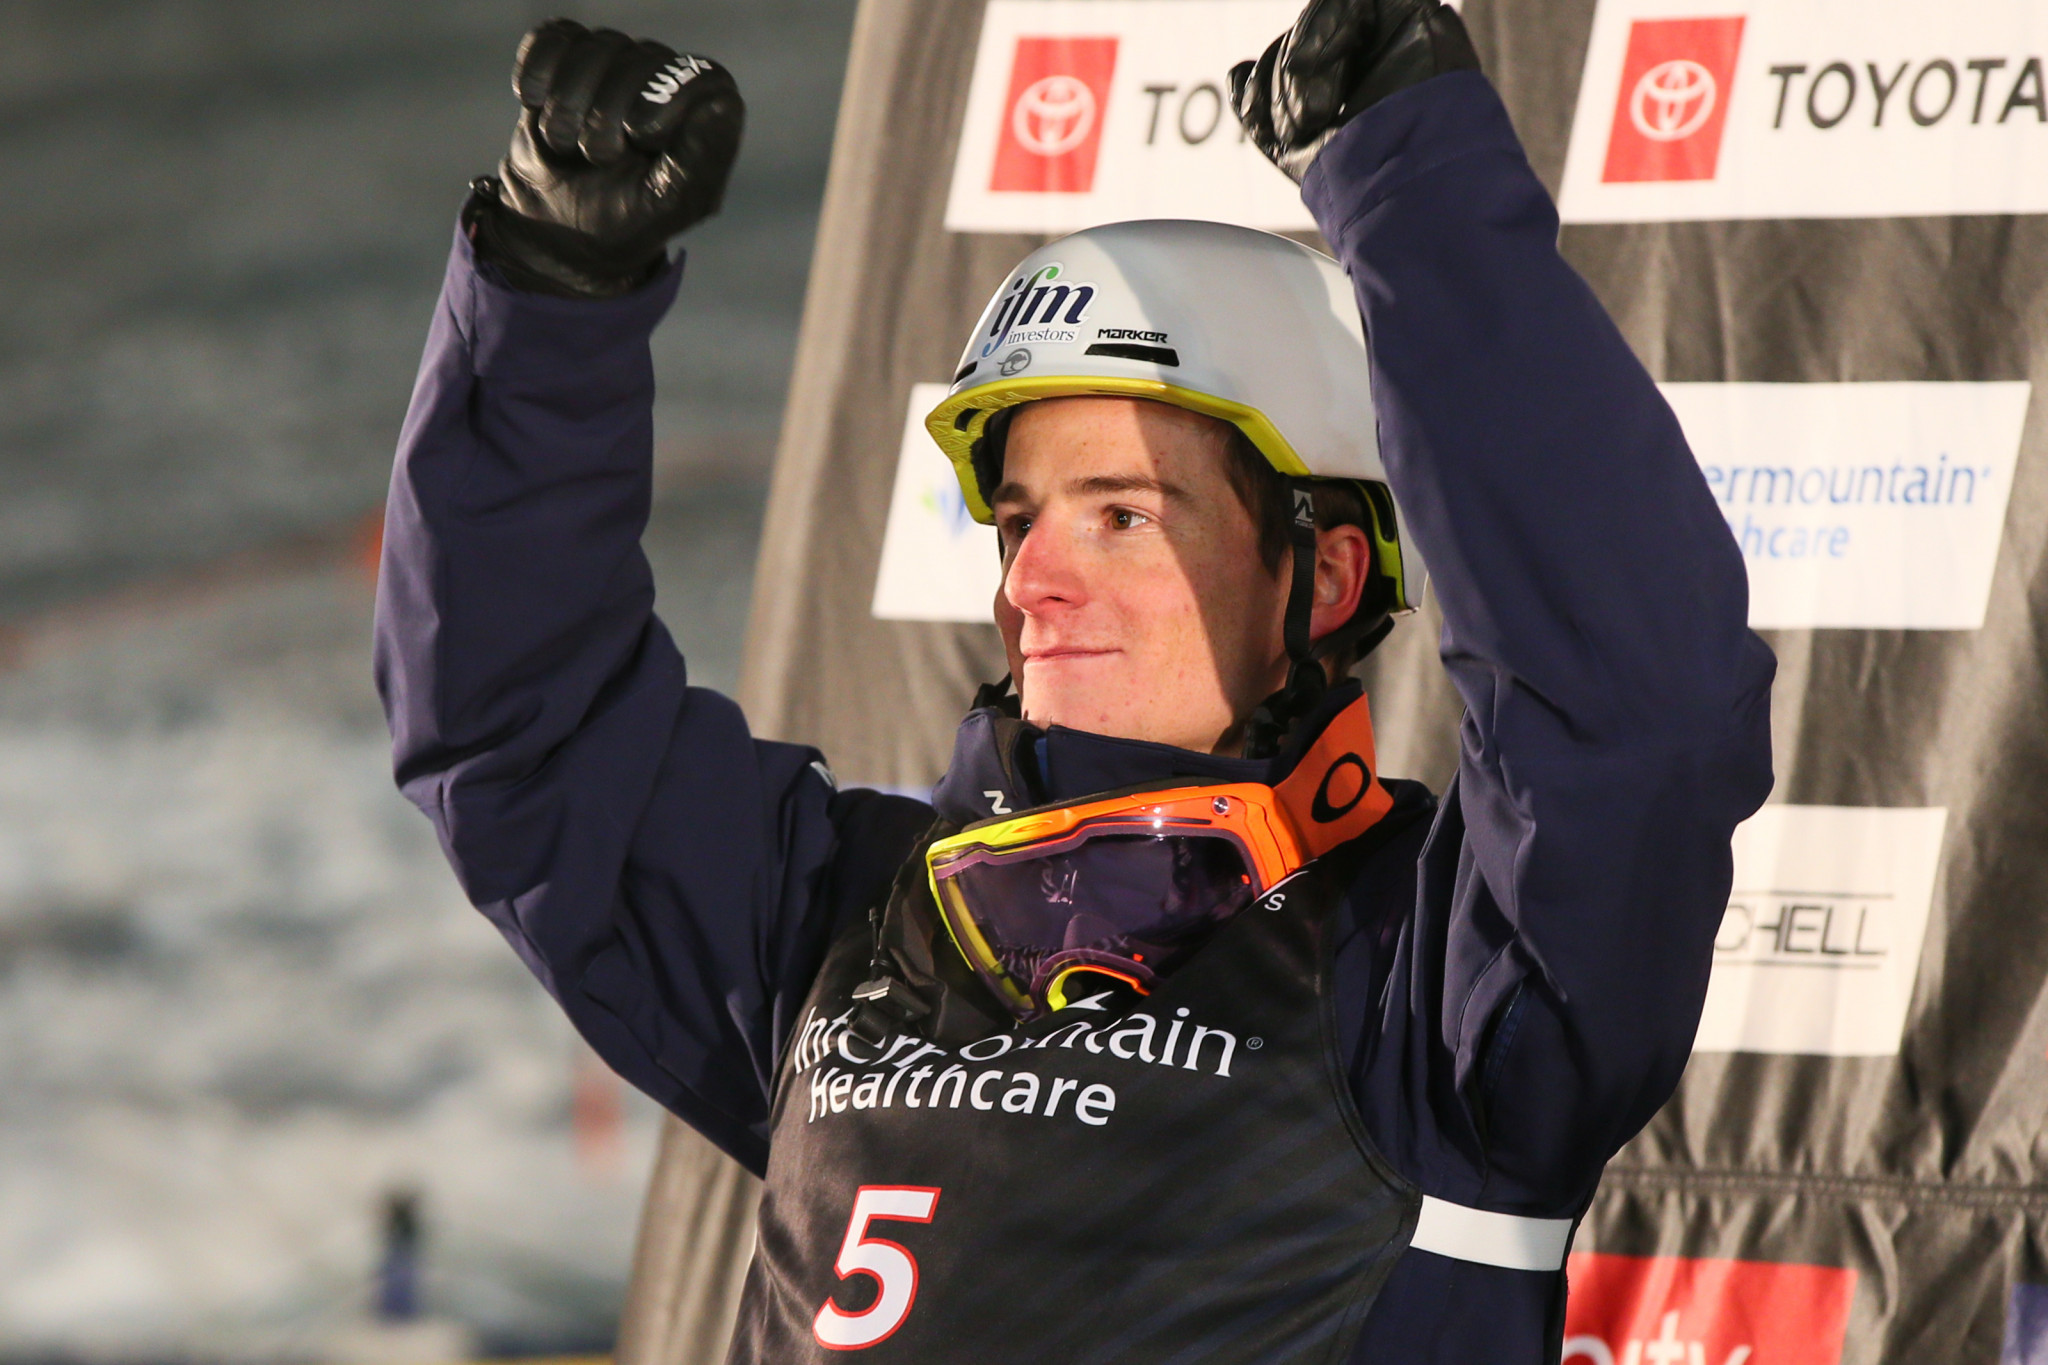 Matt Graham ended Mikaël Kingsbury’s long reign as FIS Moguls World Cup champion ©Getty Images